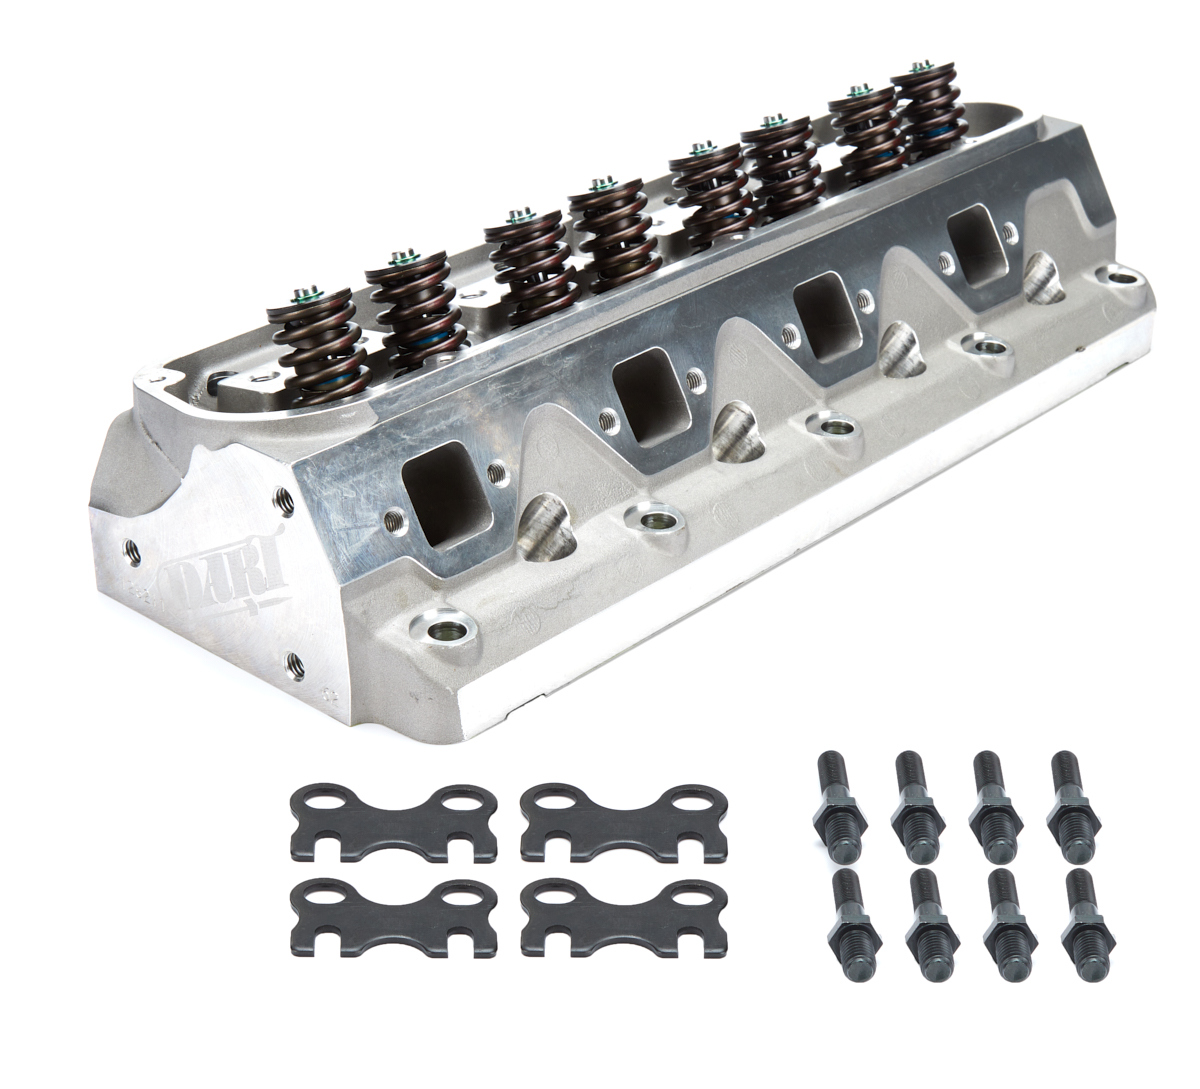 Dart 128221 Cylinder Head, SHP, 2.020 in / 1.600 in Valve, 175 cc Intake, 62 cc Chamber, 1.250 in Springs, Angle Plug, Aluminum, Small Block Ford, Each